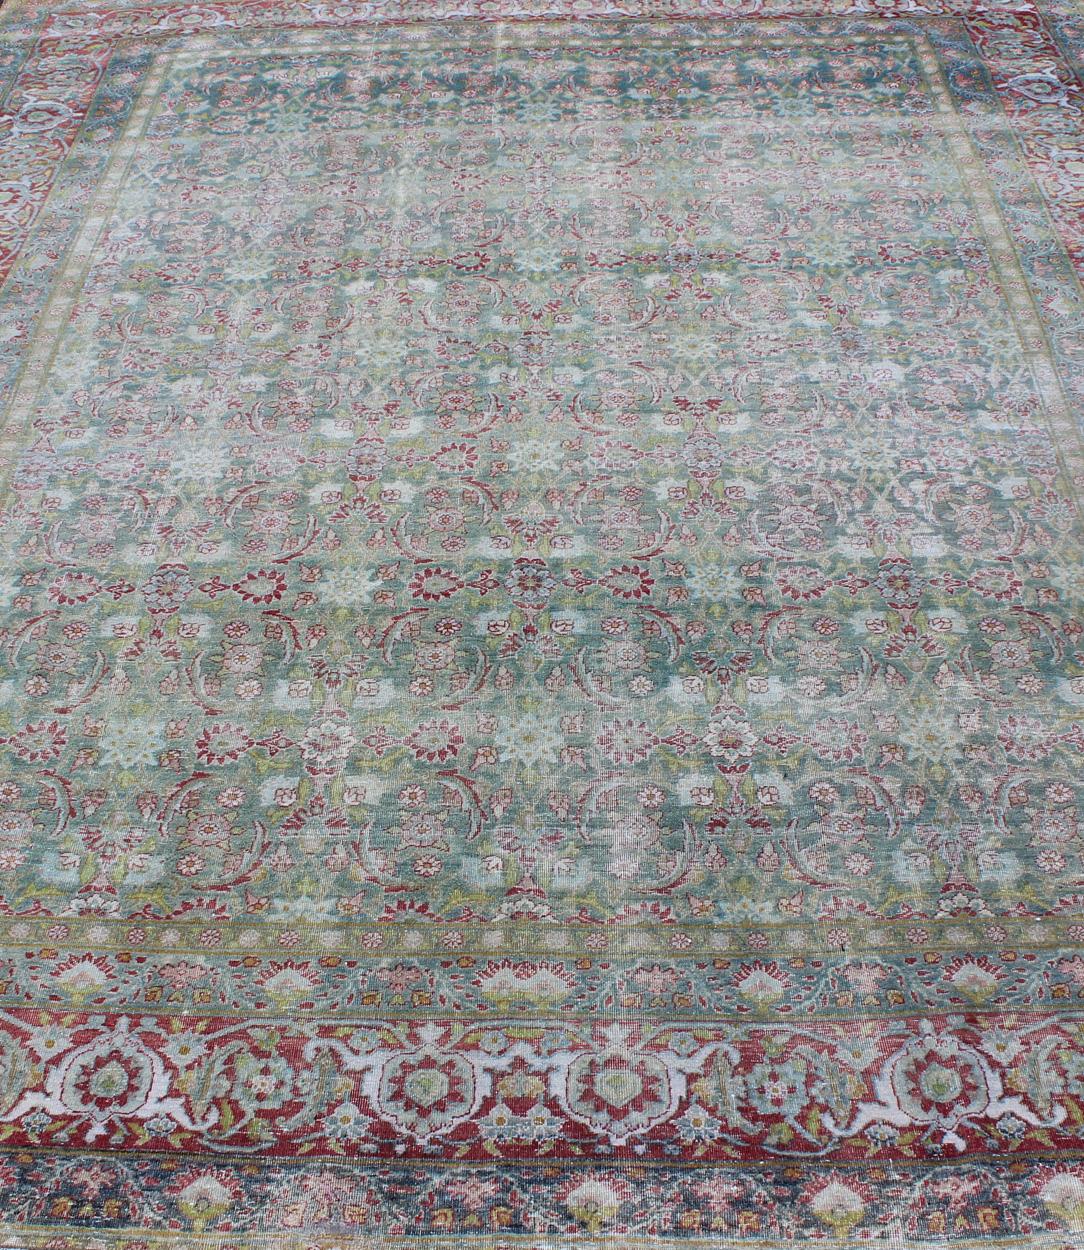 Antique Persian Kerman Lavar Rug with Geometric Leaf and Flower Herati Motifs For Sale 5